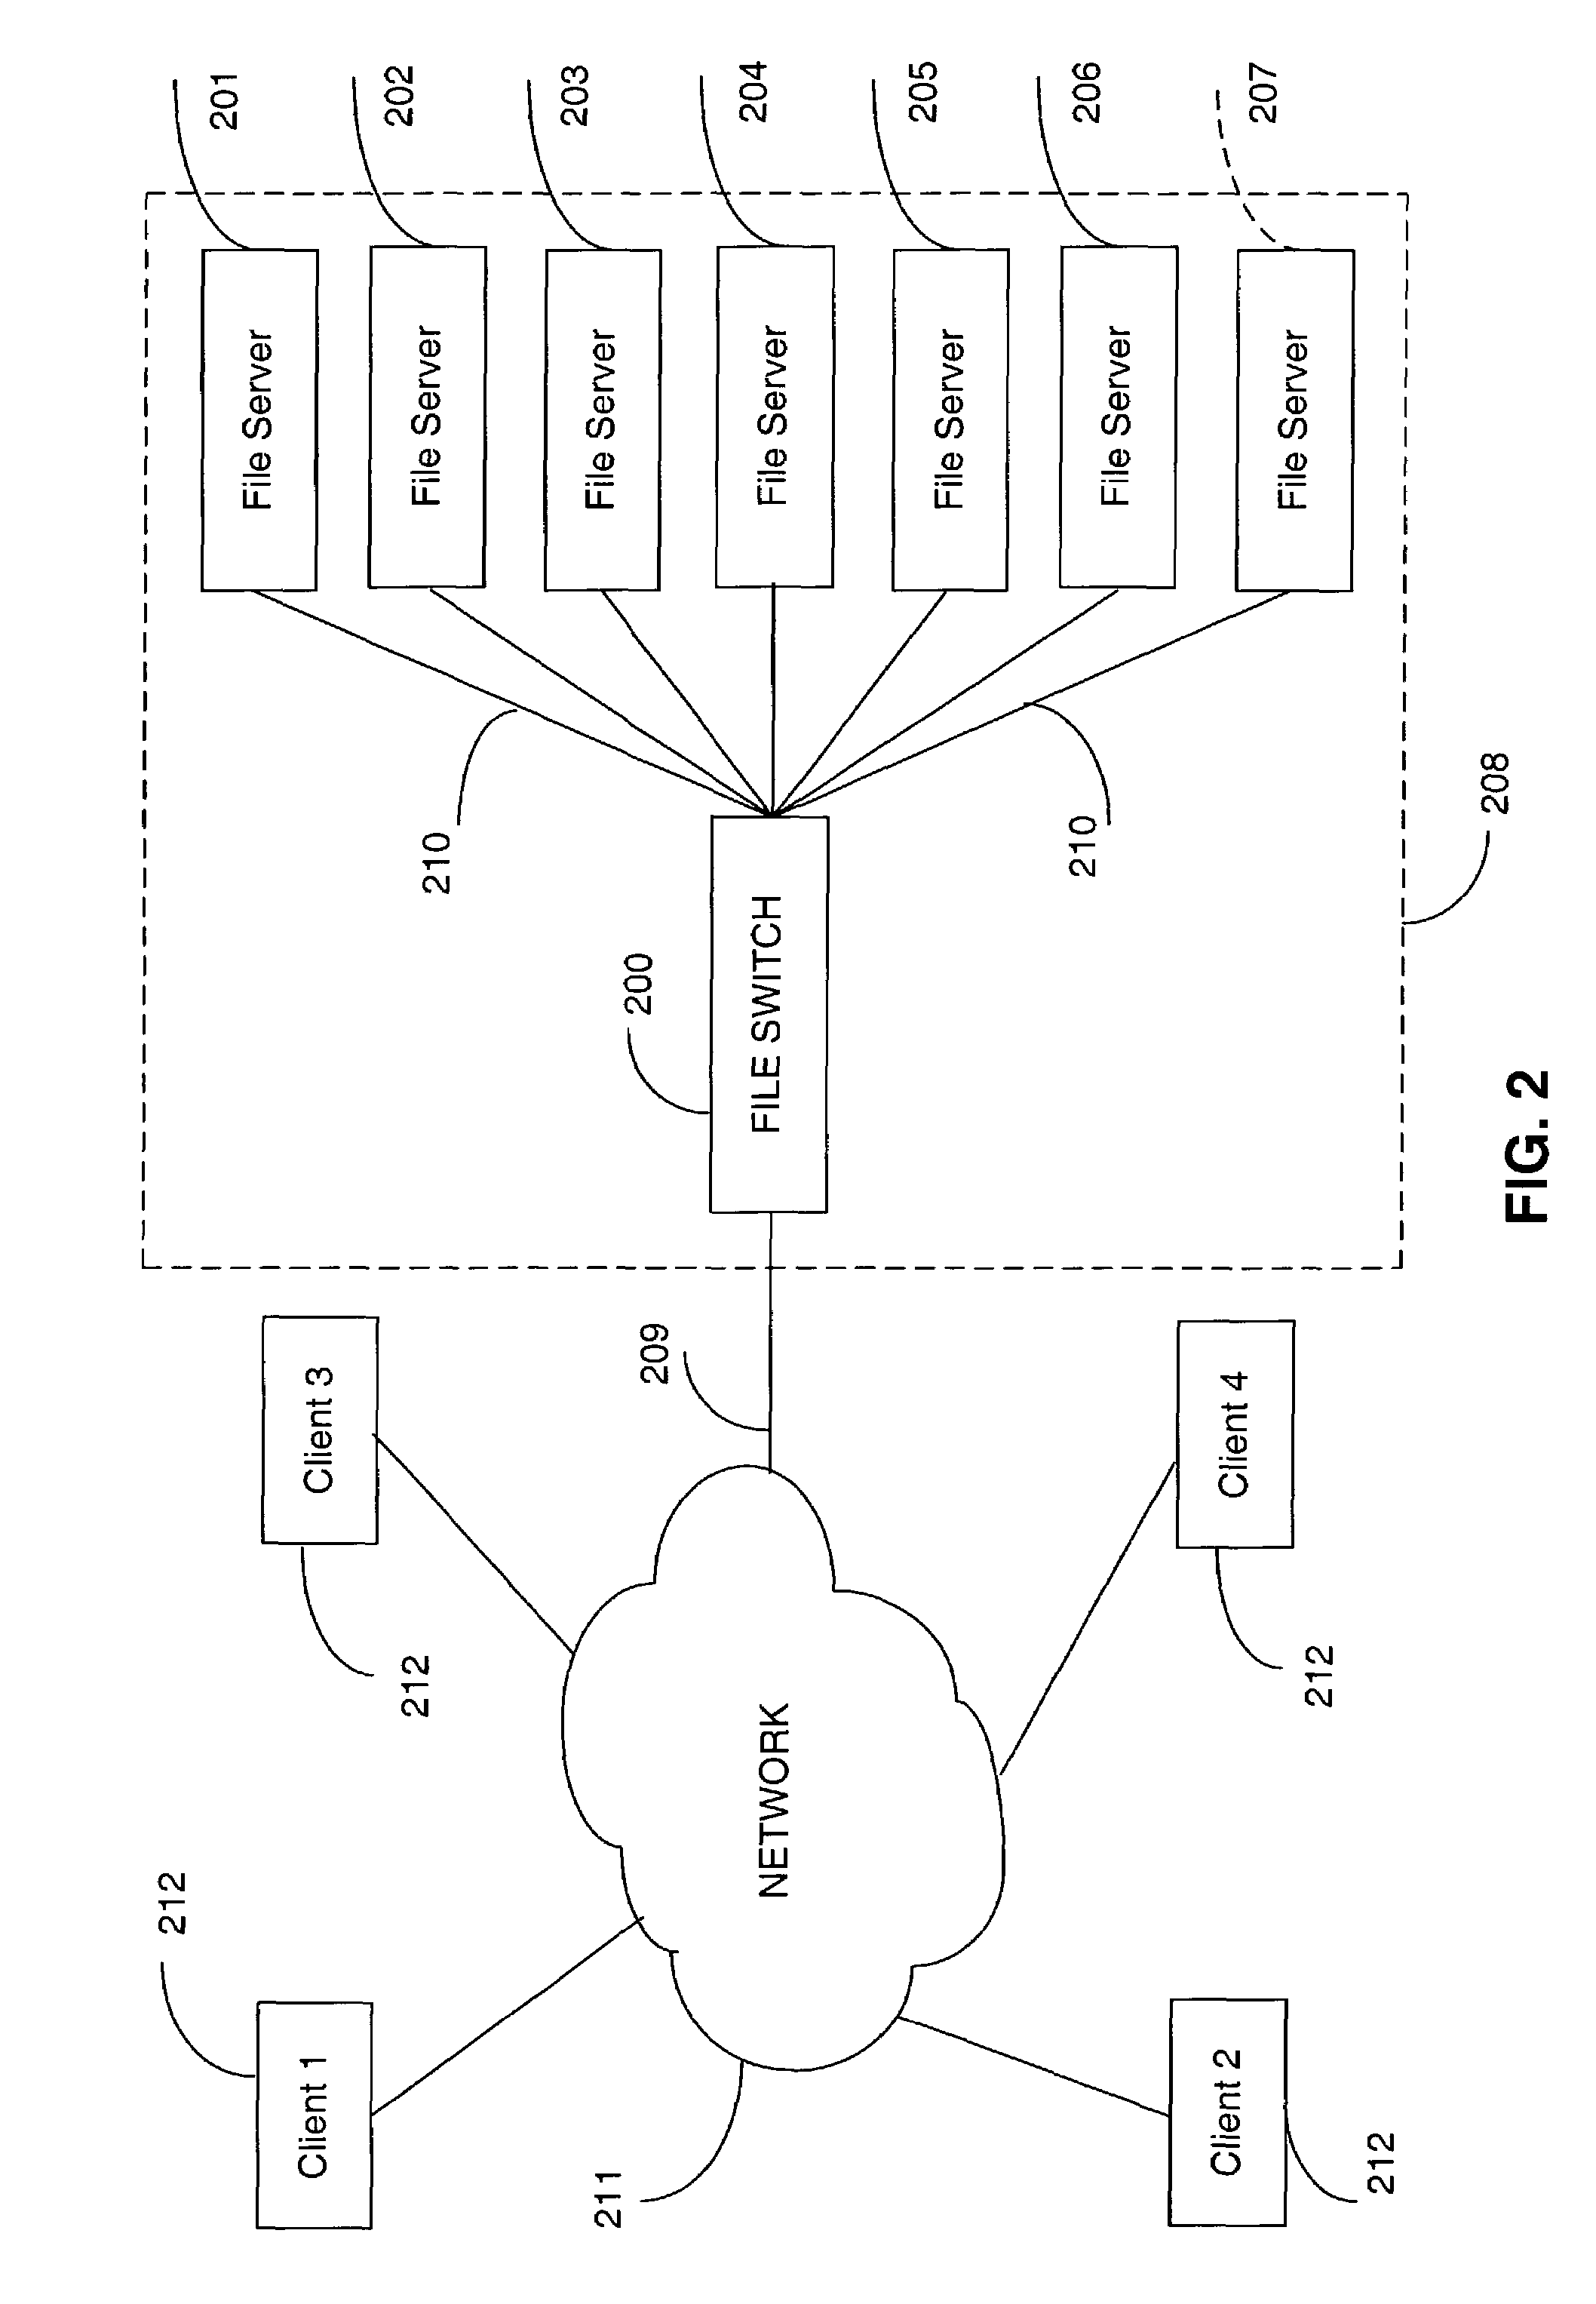 Aggregated lock management for locking aggregated files in a switched file system